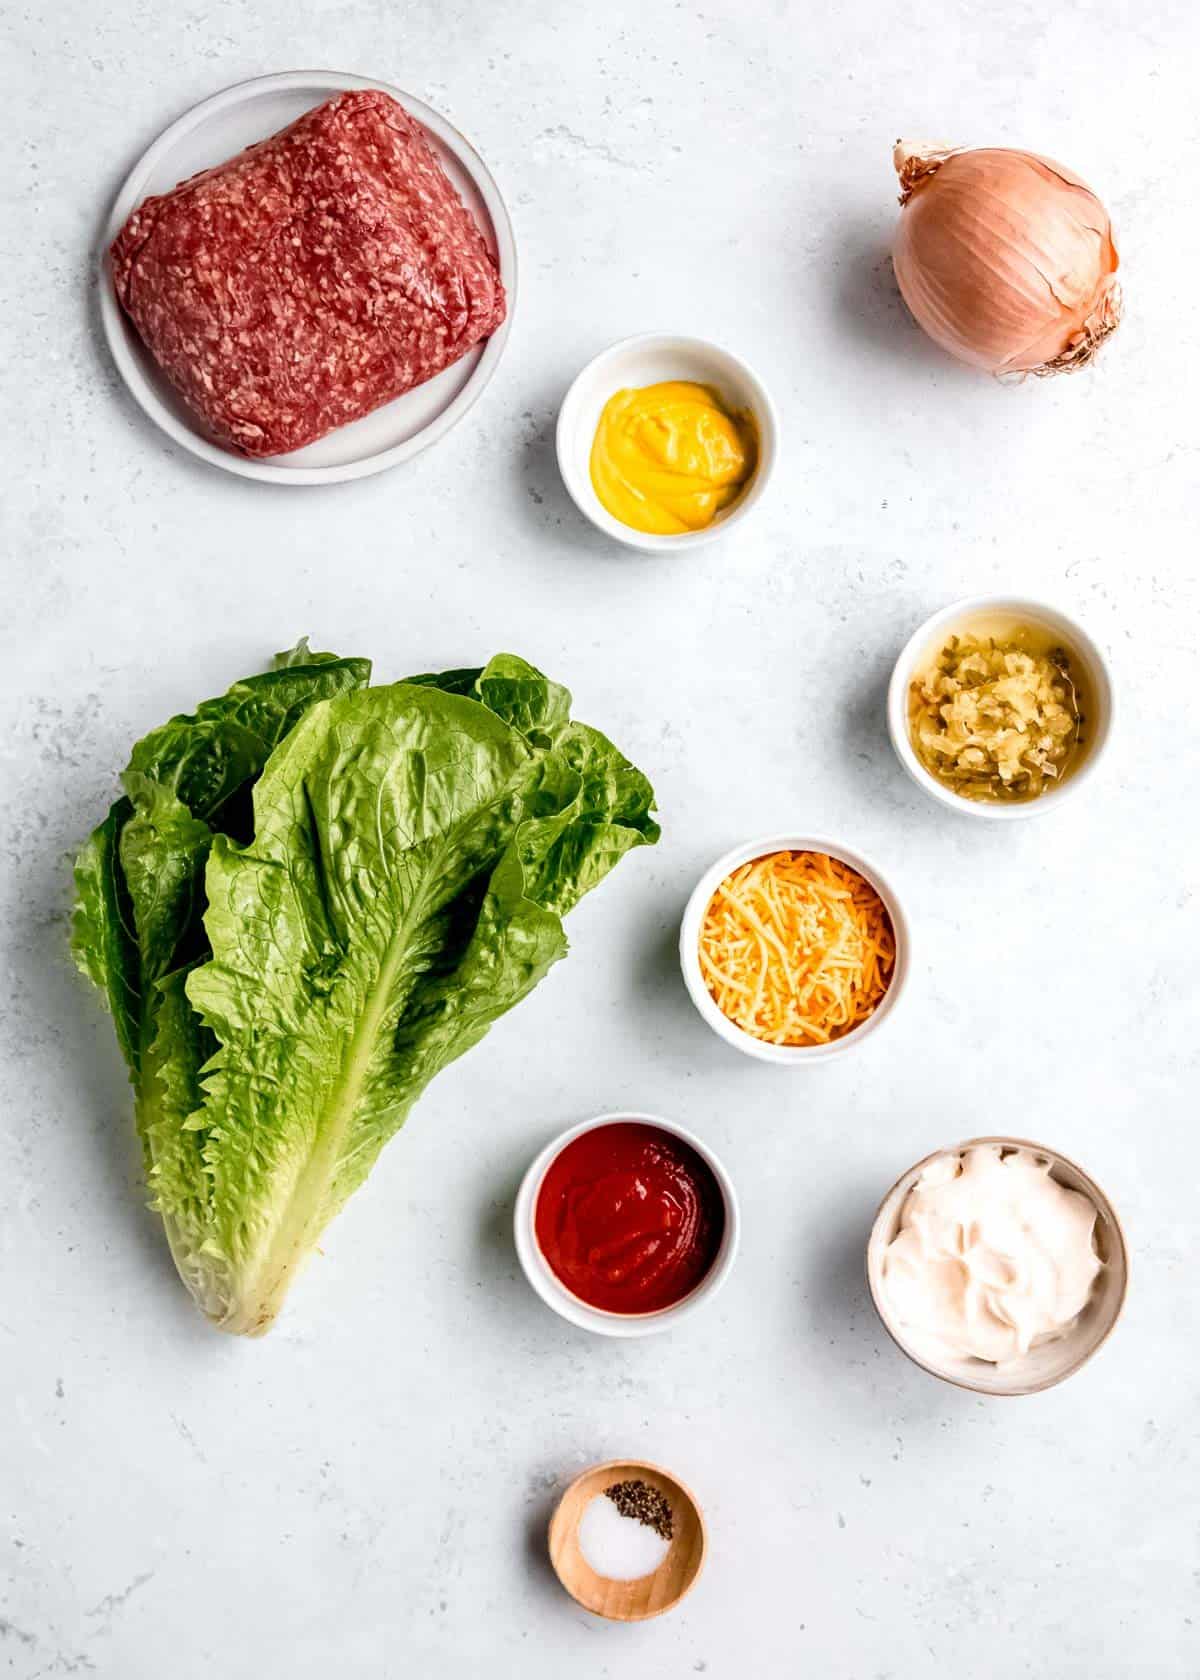 lettuce wrap burger ingredients on a white table